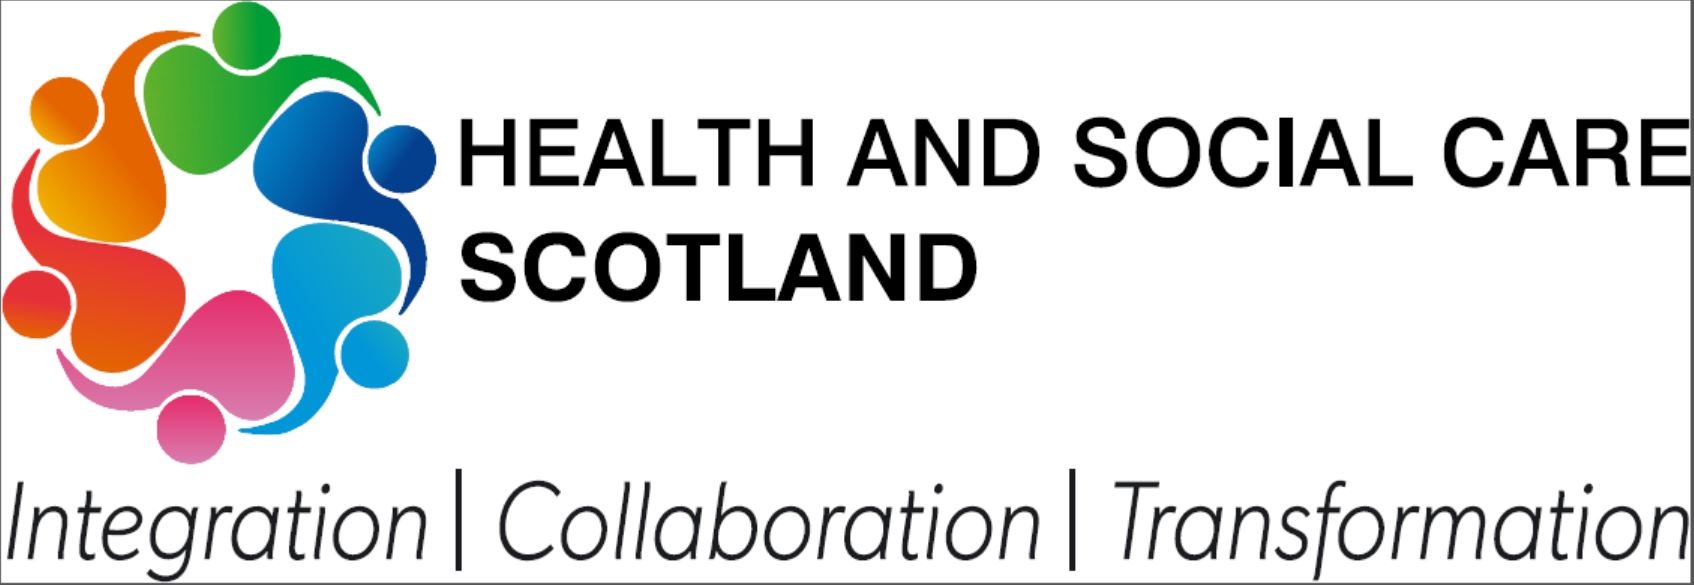 Vibrant new website sees Health and Social Care Scotland go online 